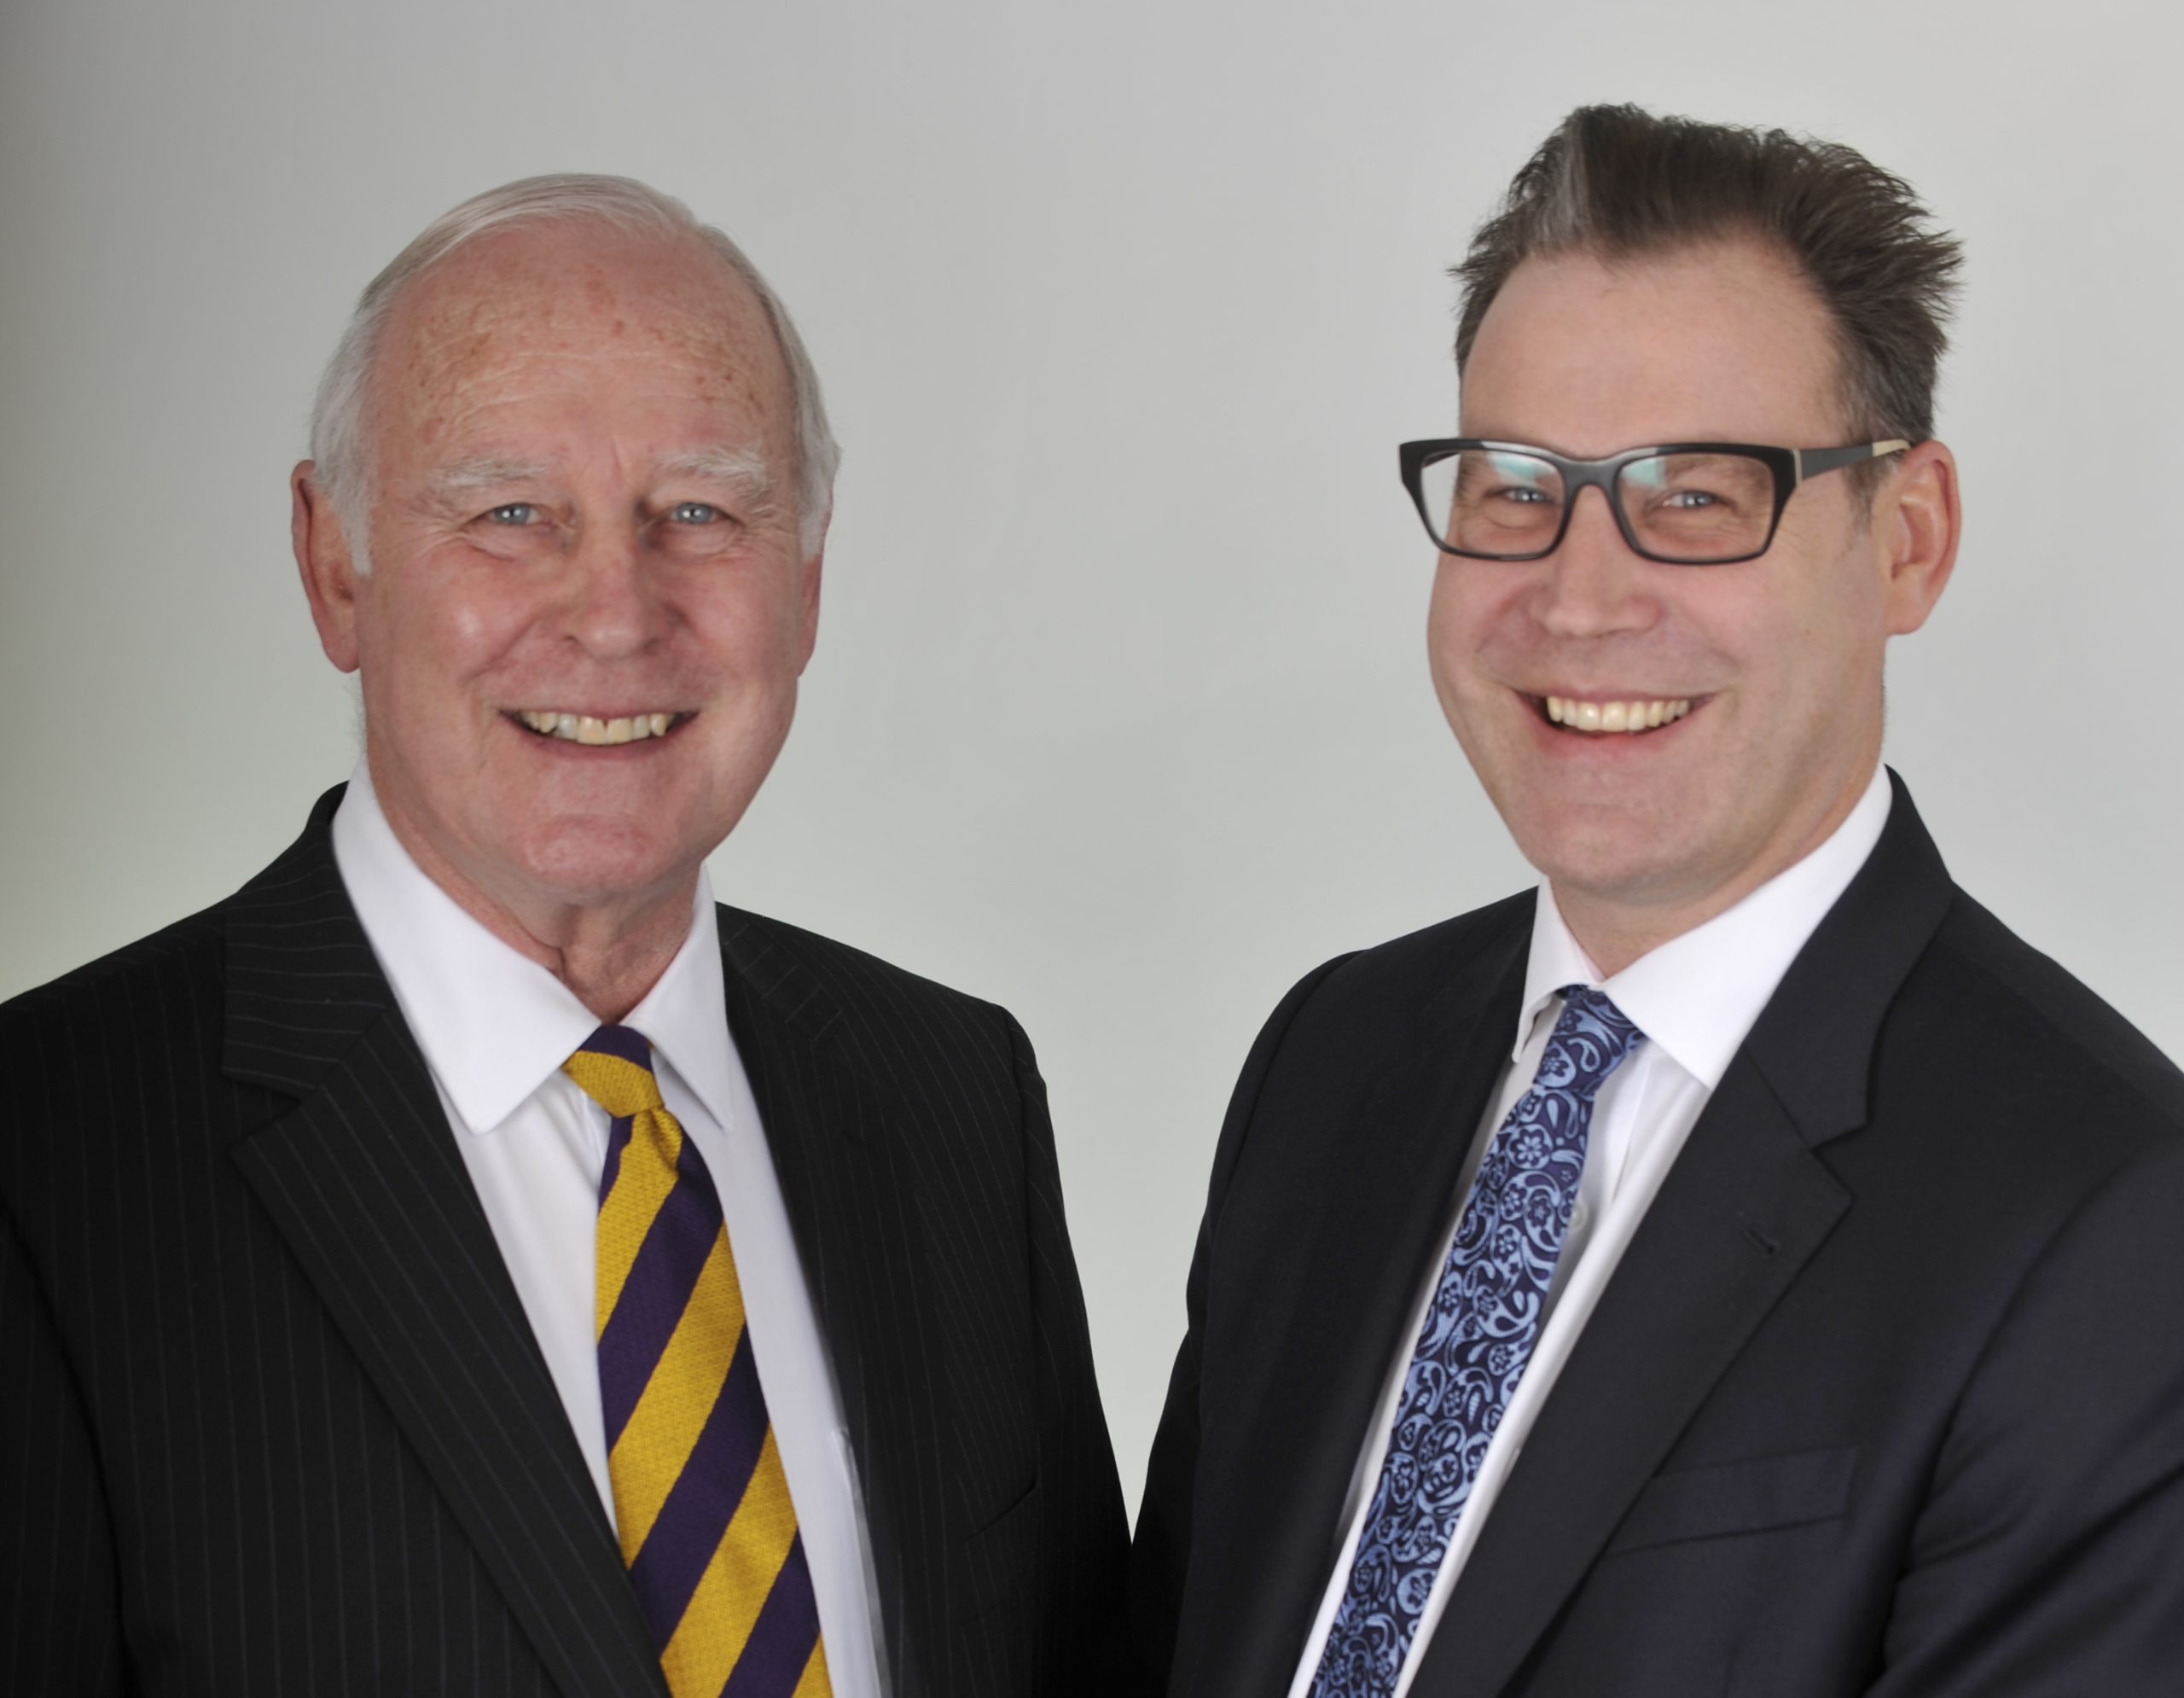 Norman Grundon has become President of Grundon Waste Management, with Neil Grundon being appointed Chairman, making him the third generation of the Grundon family to lead the business